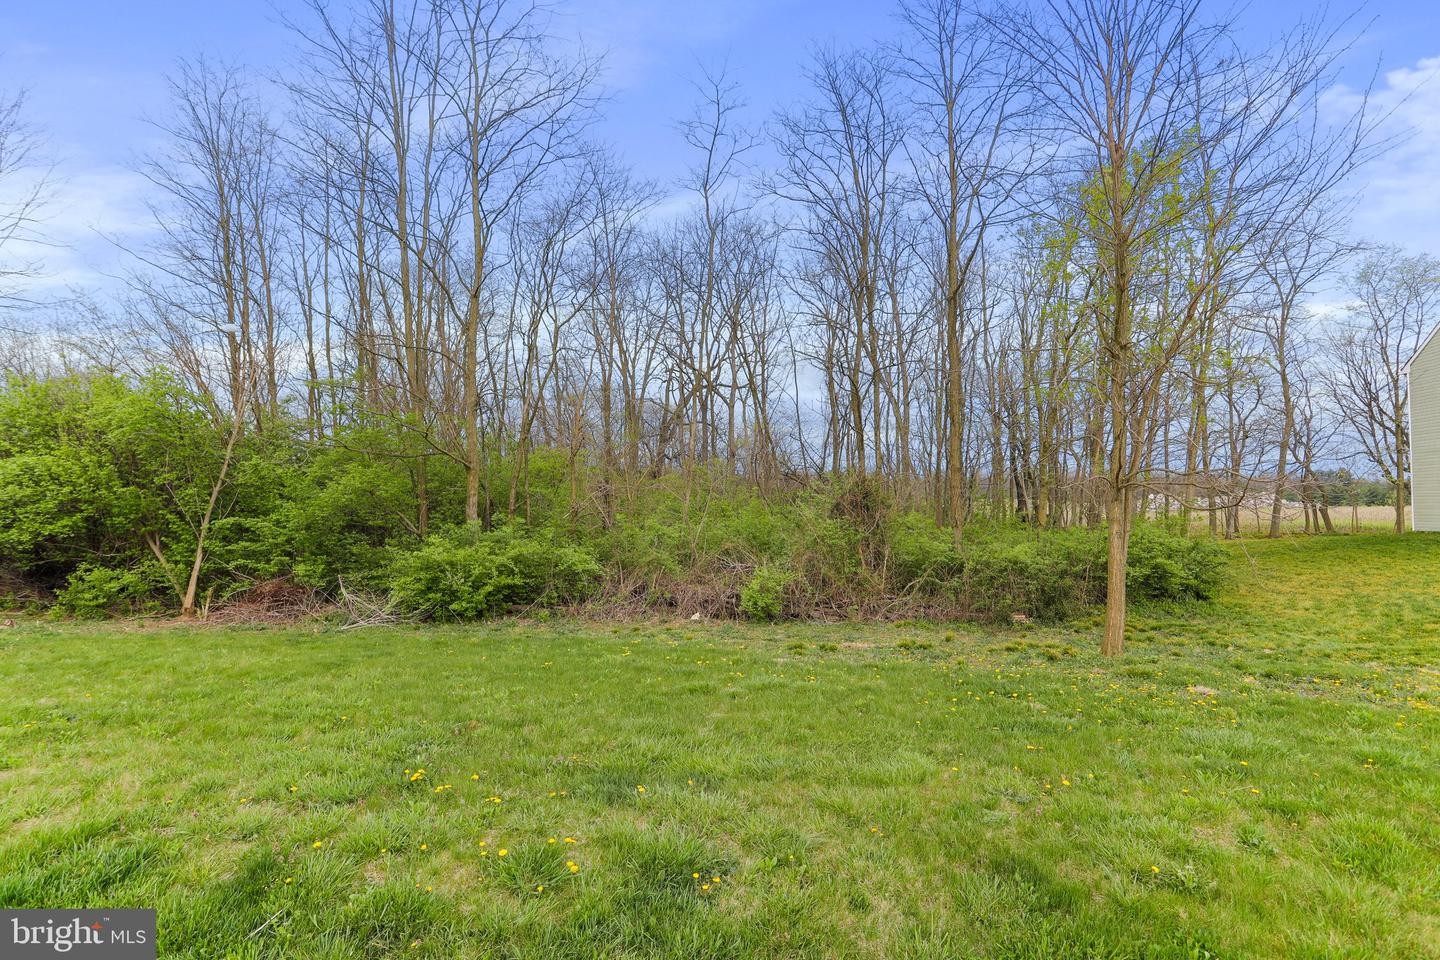 1. Lot 66 Wedgewood Dr